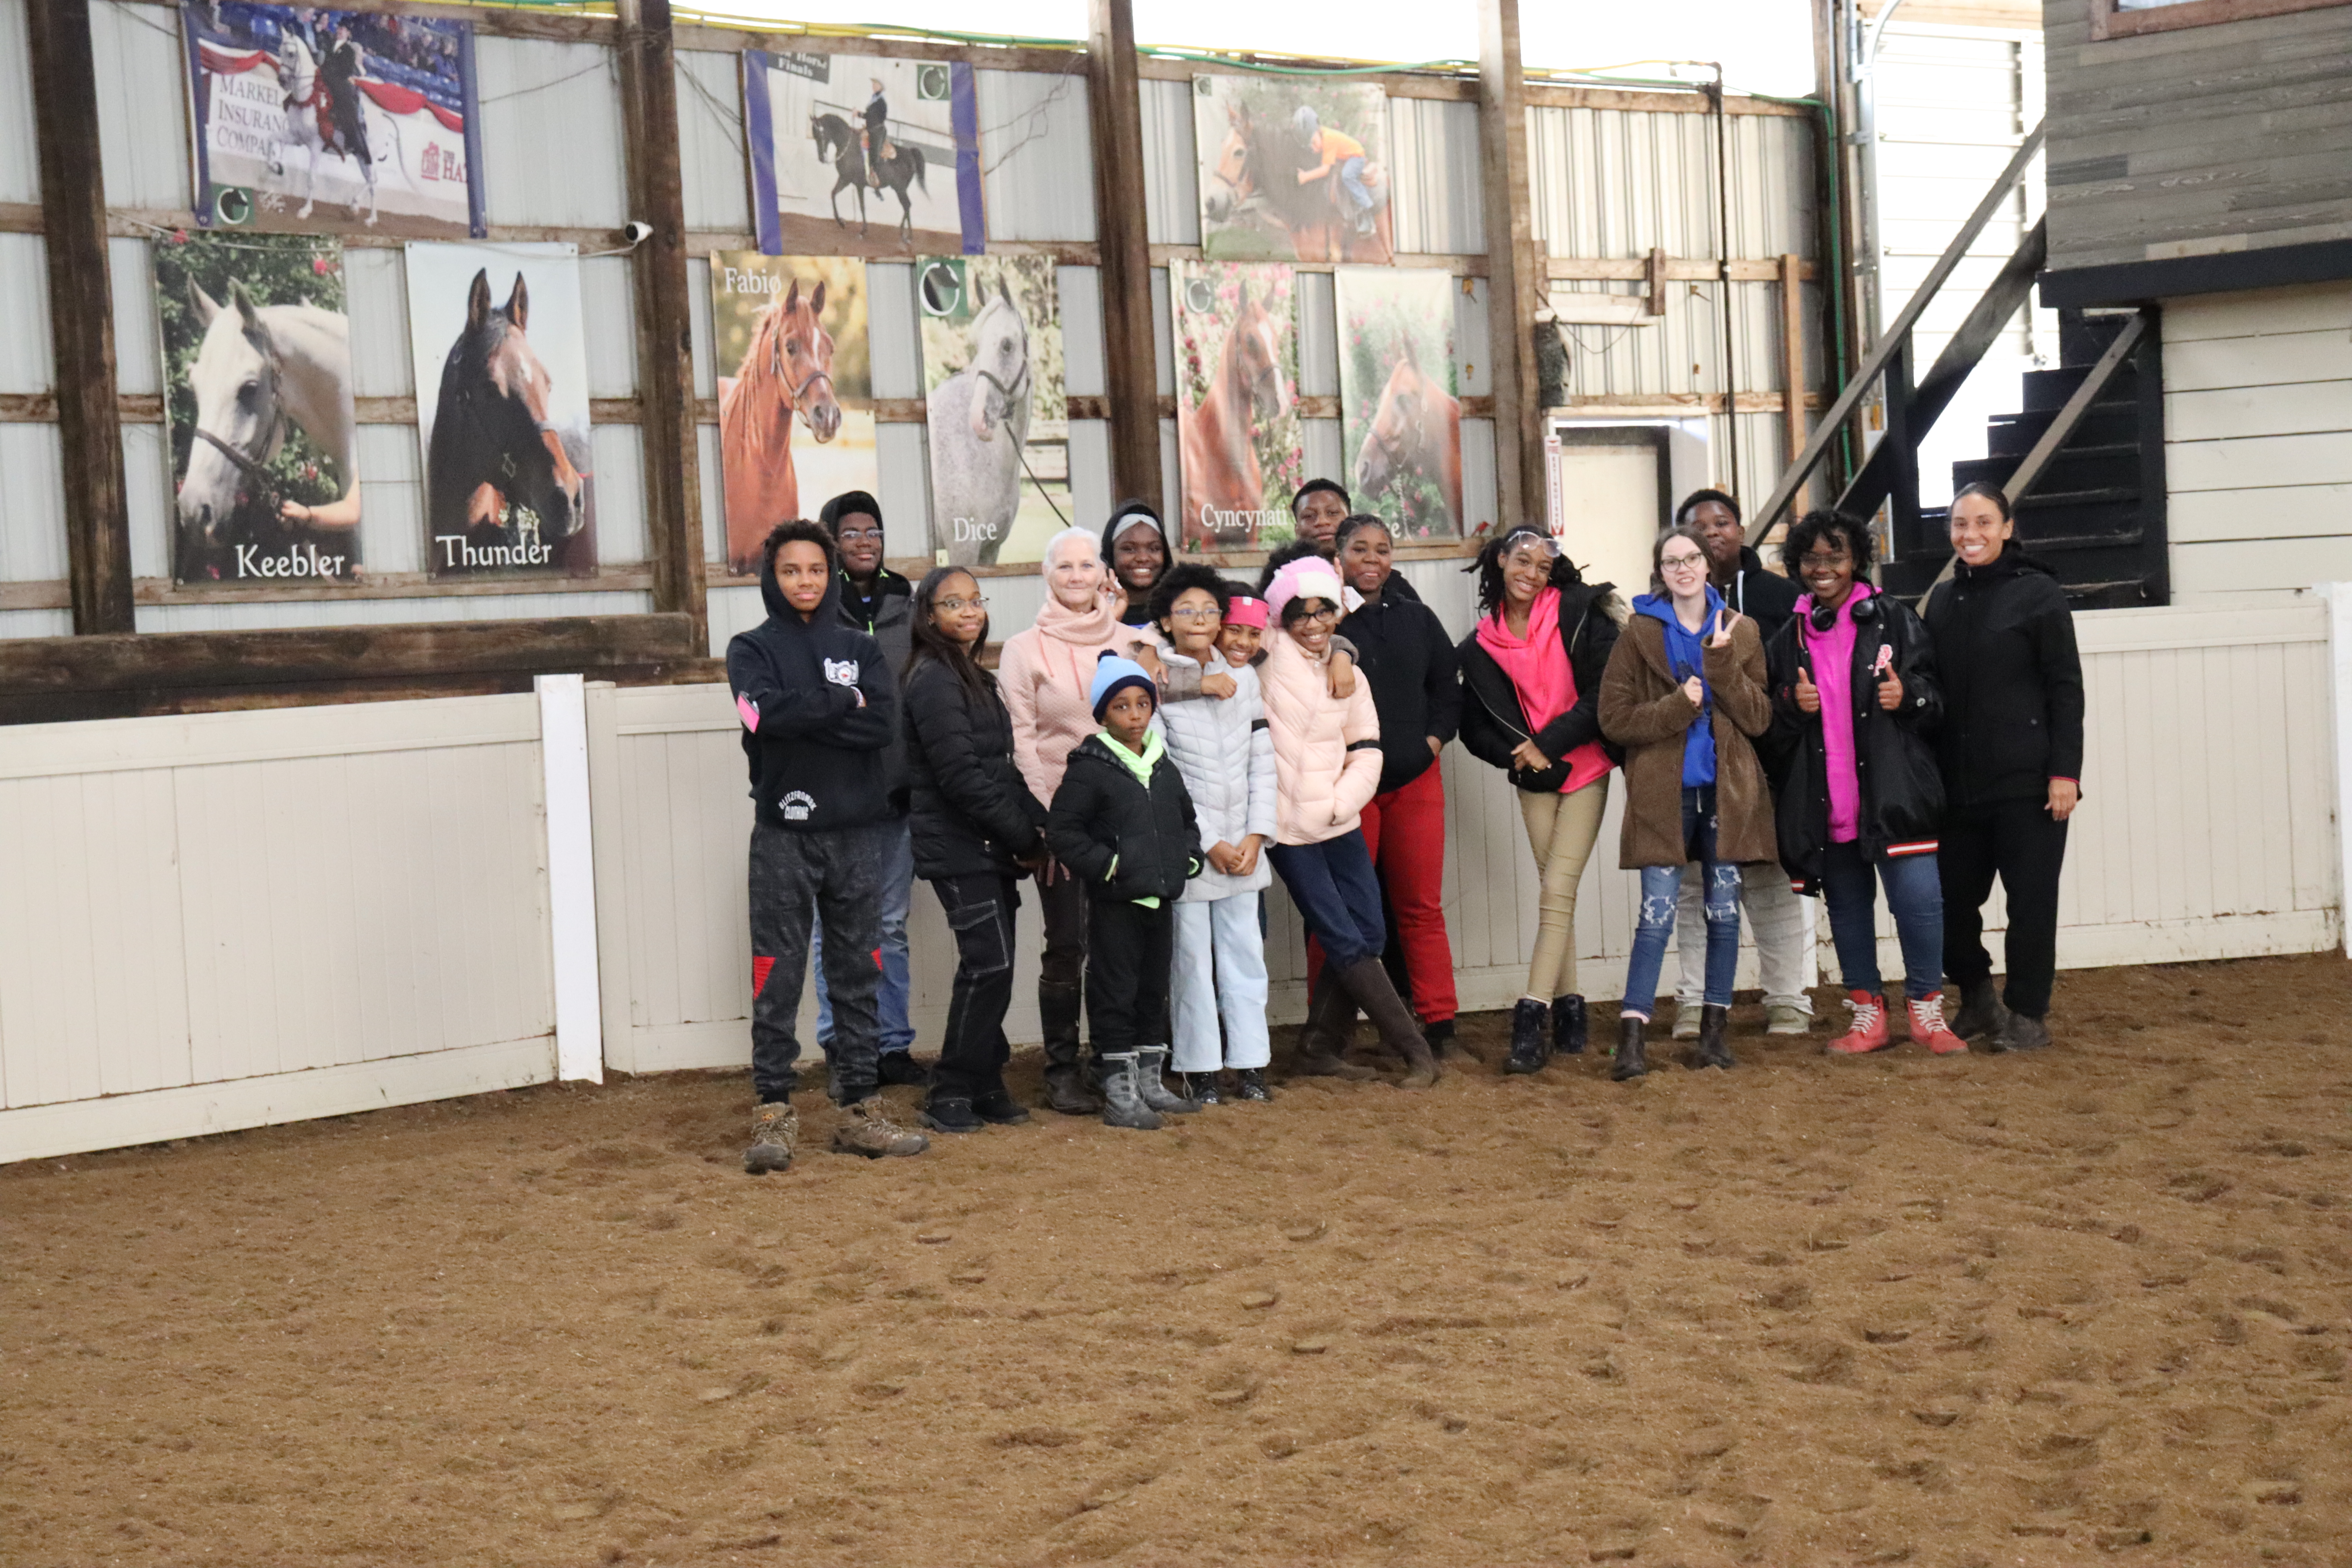 Detroit Horse Power students receiving riding lessons at Rushlow's Arabian Farm. Photo by Zynab Al-Timimi